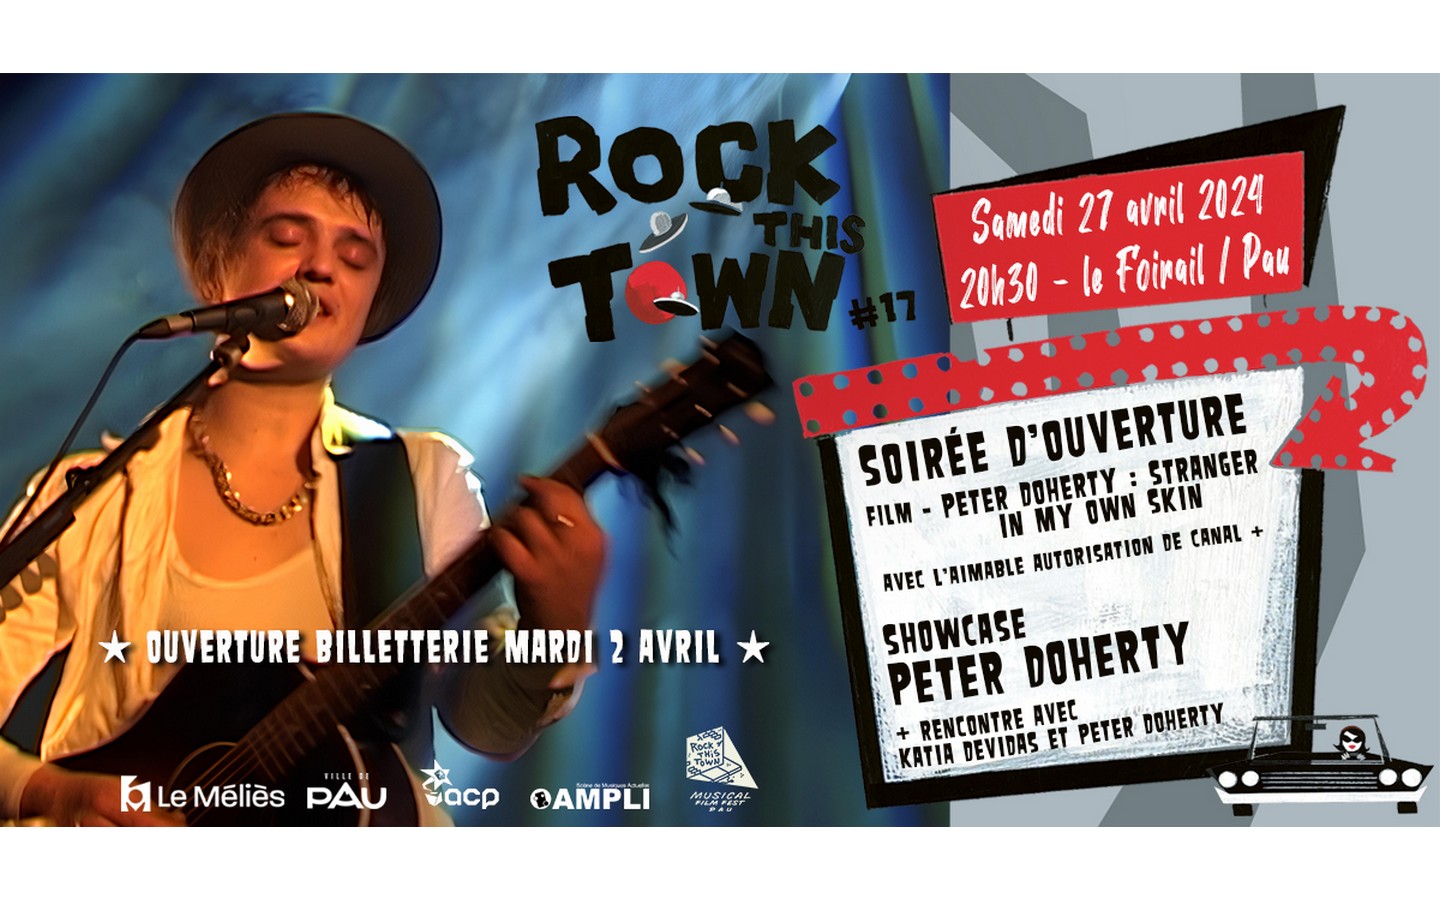 Rock This Town Documentaire Stranger in my own skin